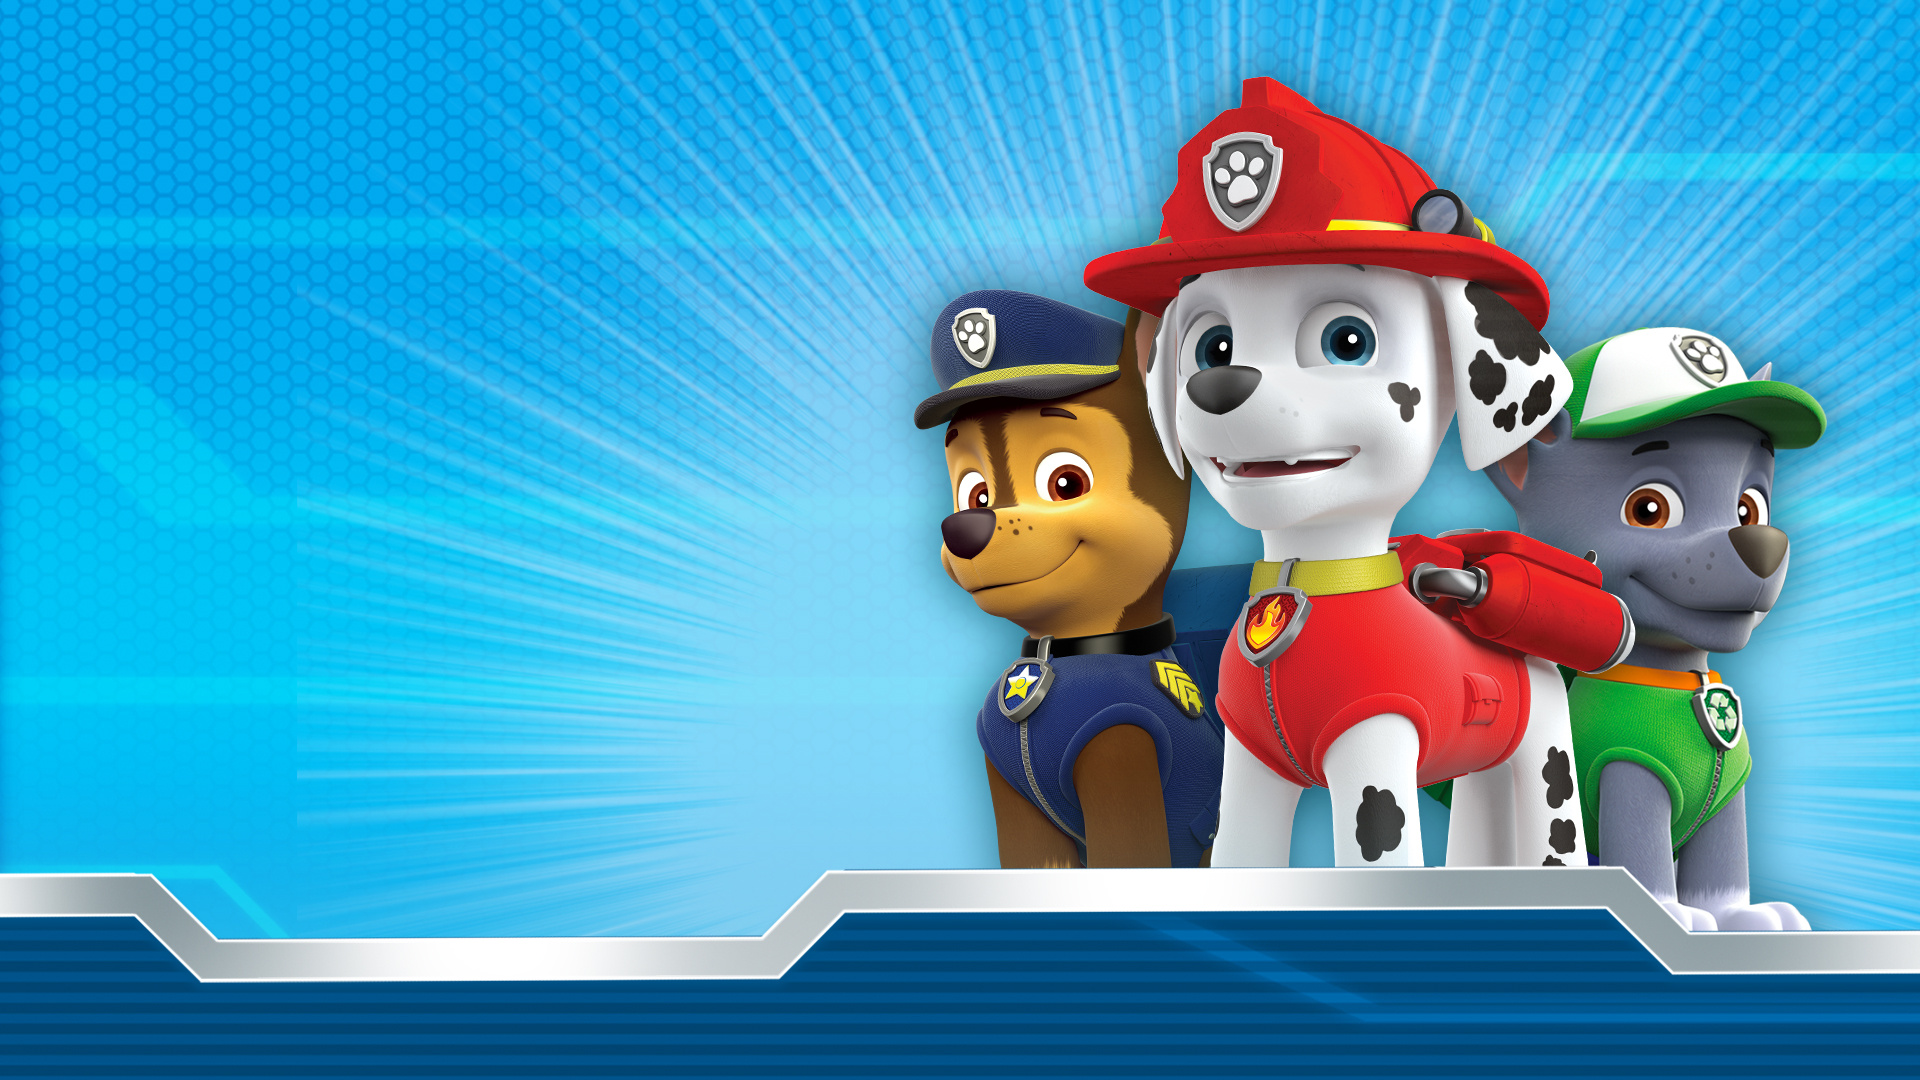 Marshall Paw Patrol wallpapers, Firefighter pup, Daring rescue, Fire emergency, 1920x1080 Full HD Desktop